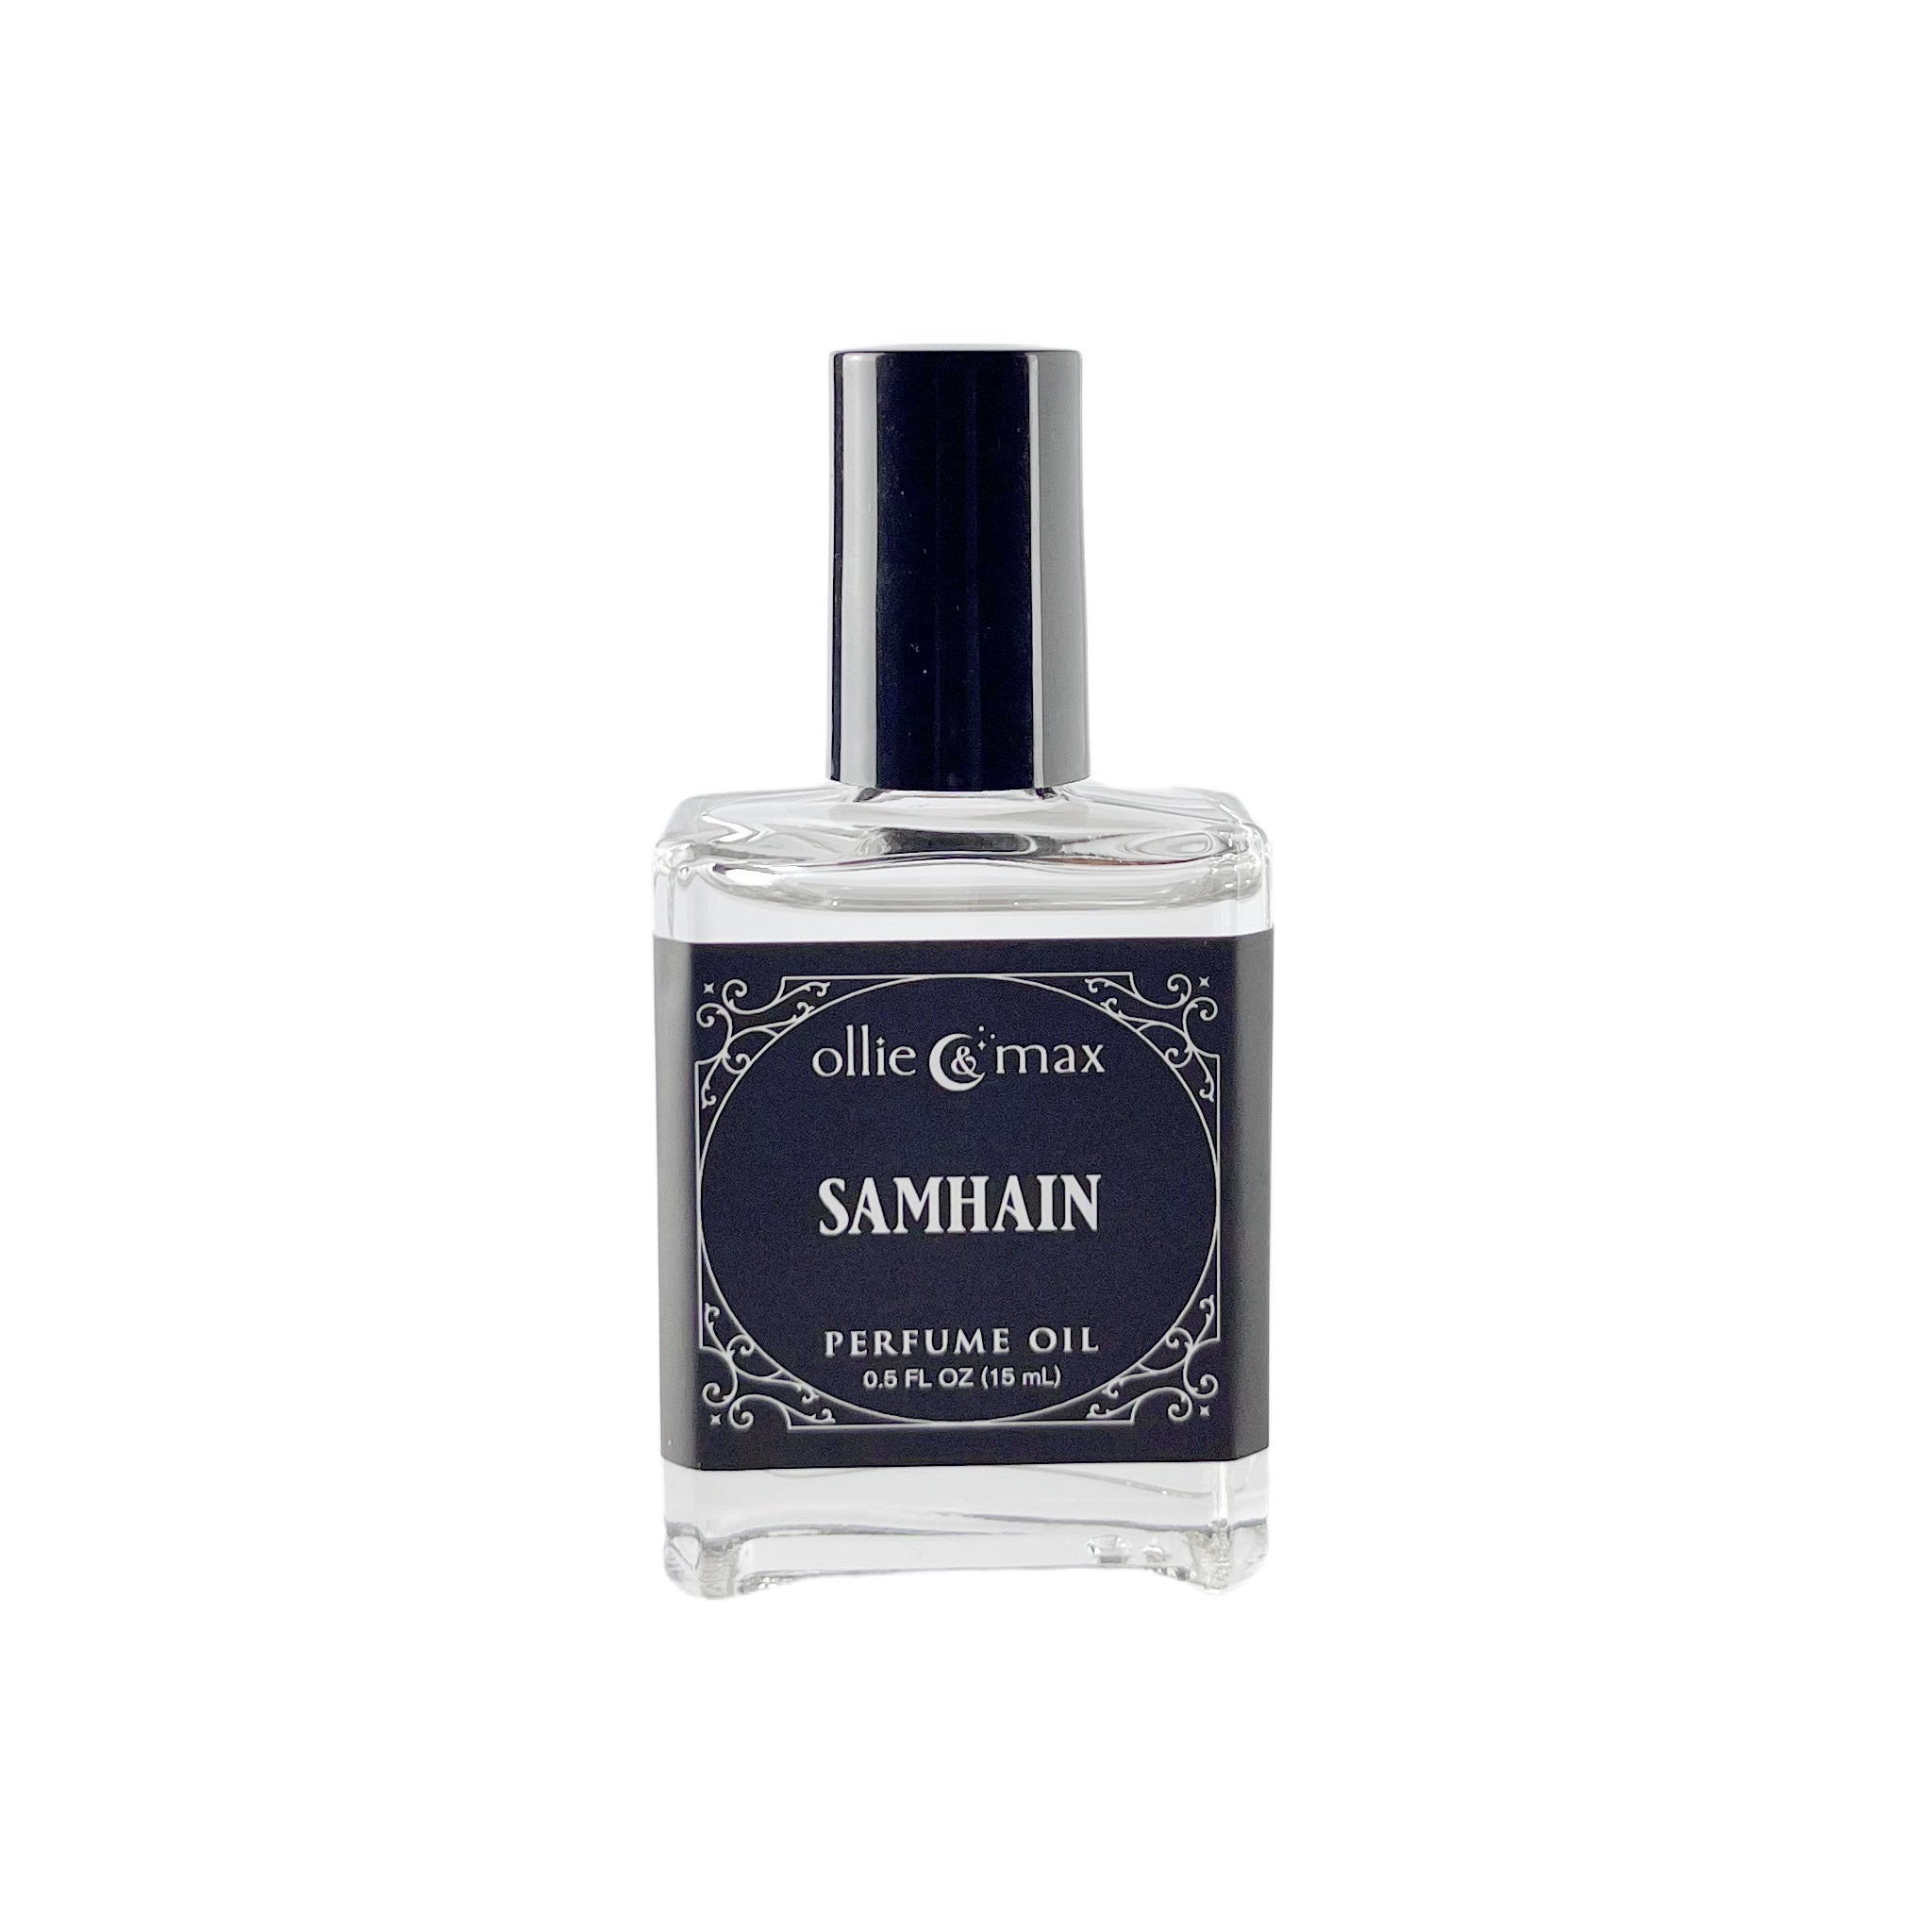 Rectangle glass bottle with a black cap, Samhain perfume 15ml, natural and vegan